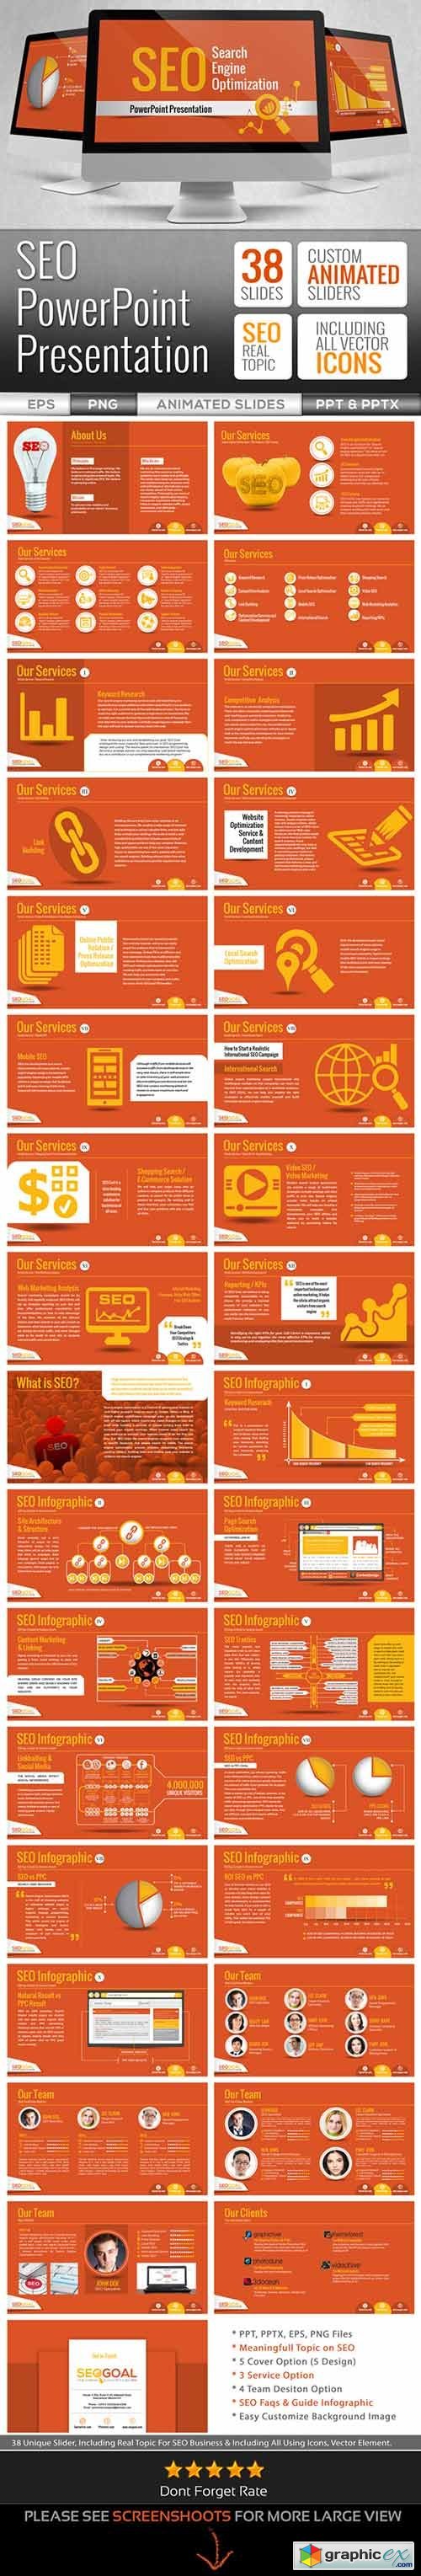 Search Engine Optimization | SEO Services PowerPoint Presentation Templates